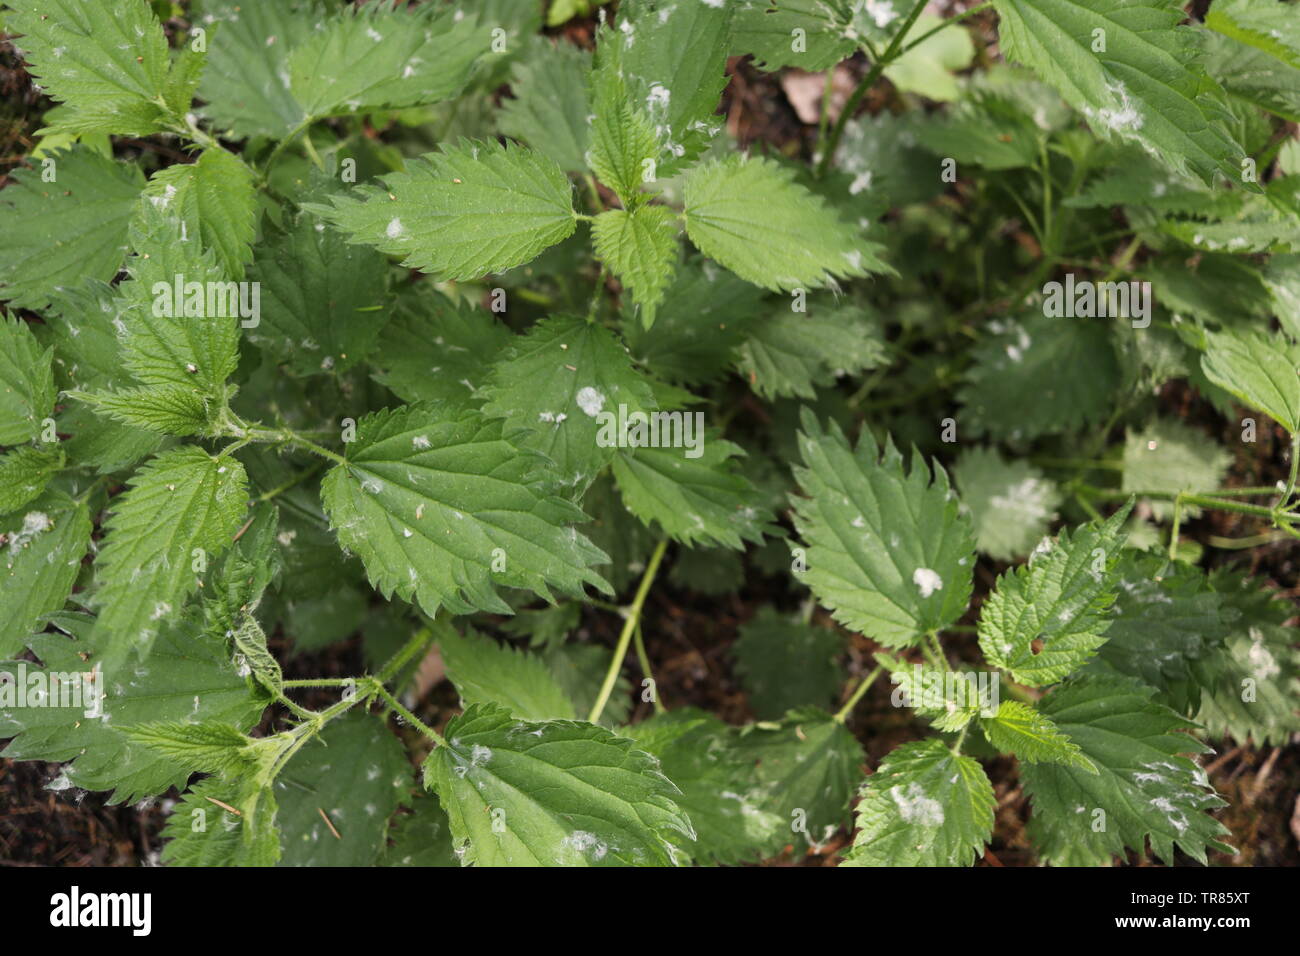 Dirty green nettles, a close-up. Stock Photo